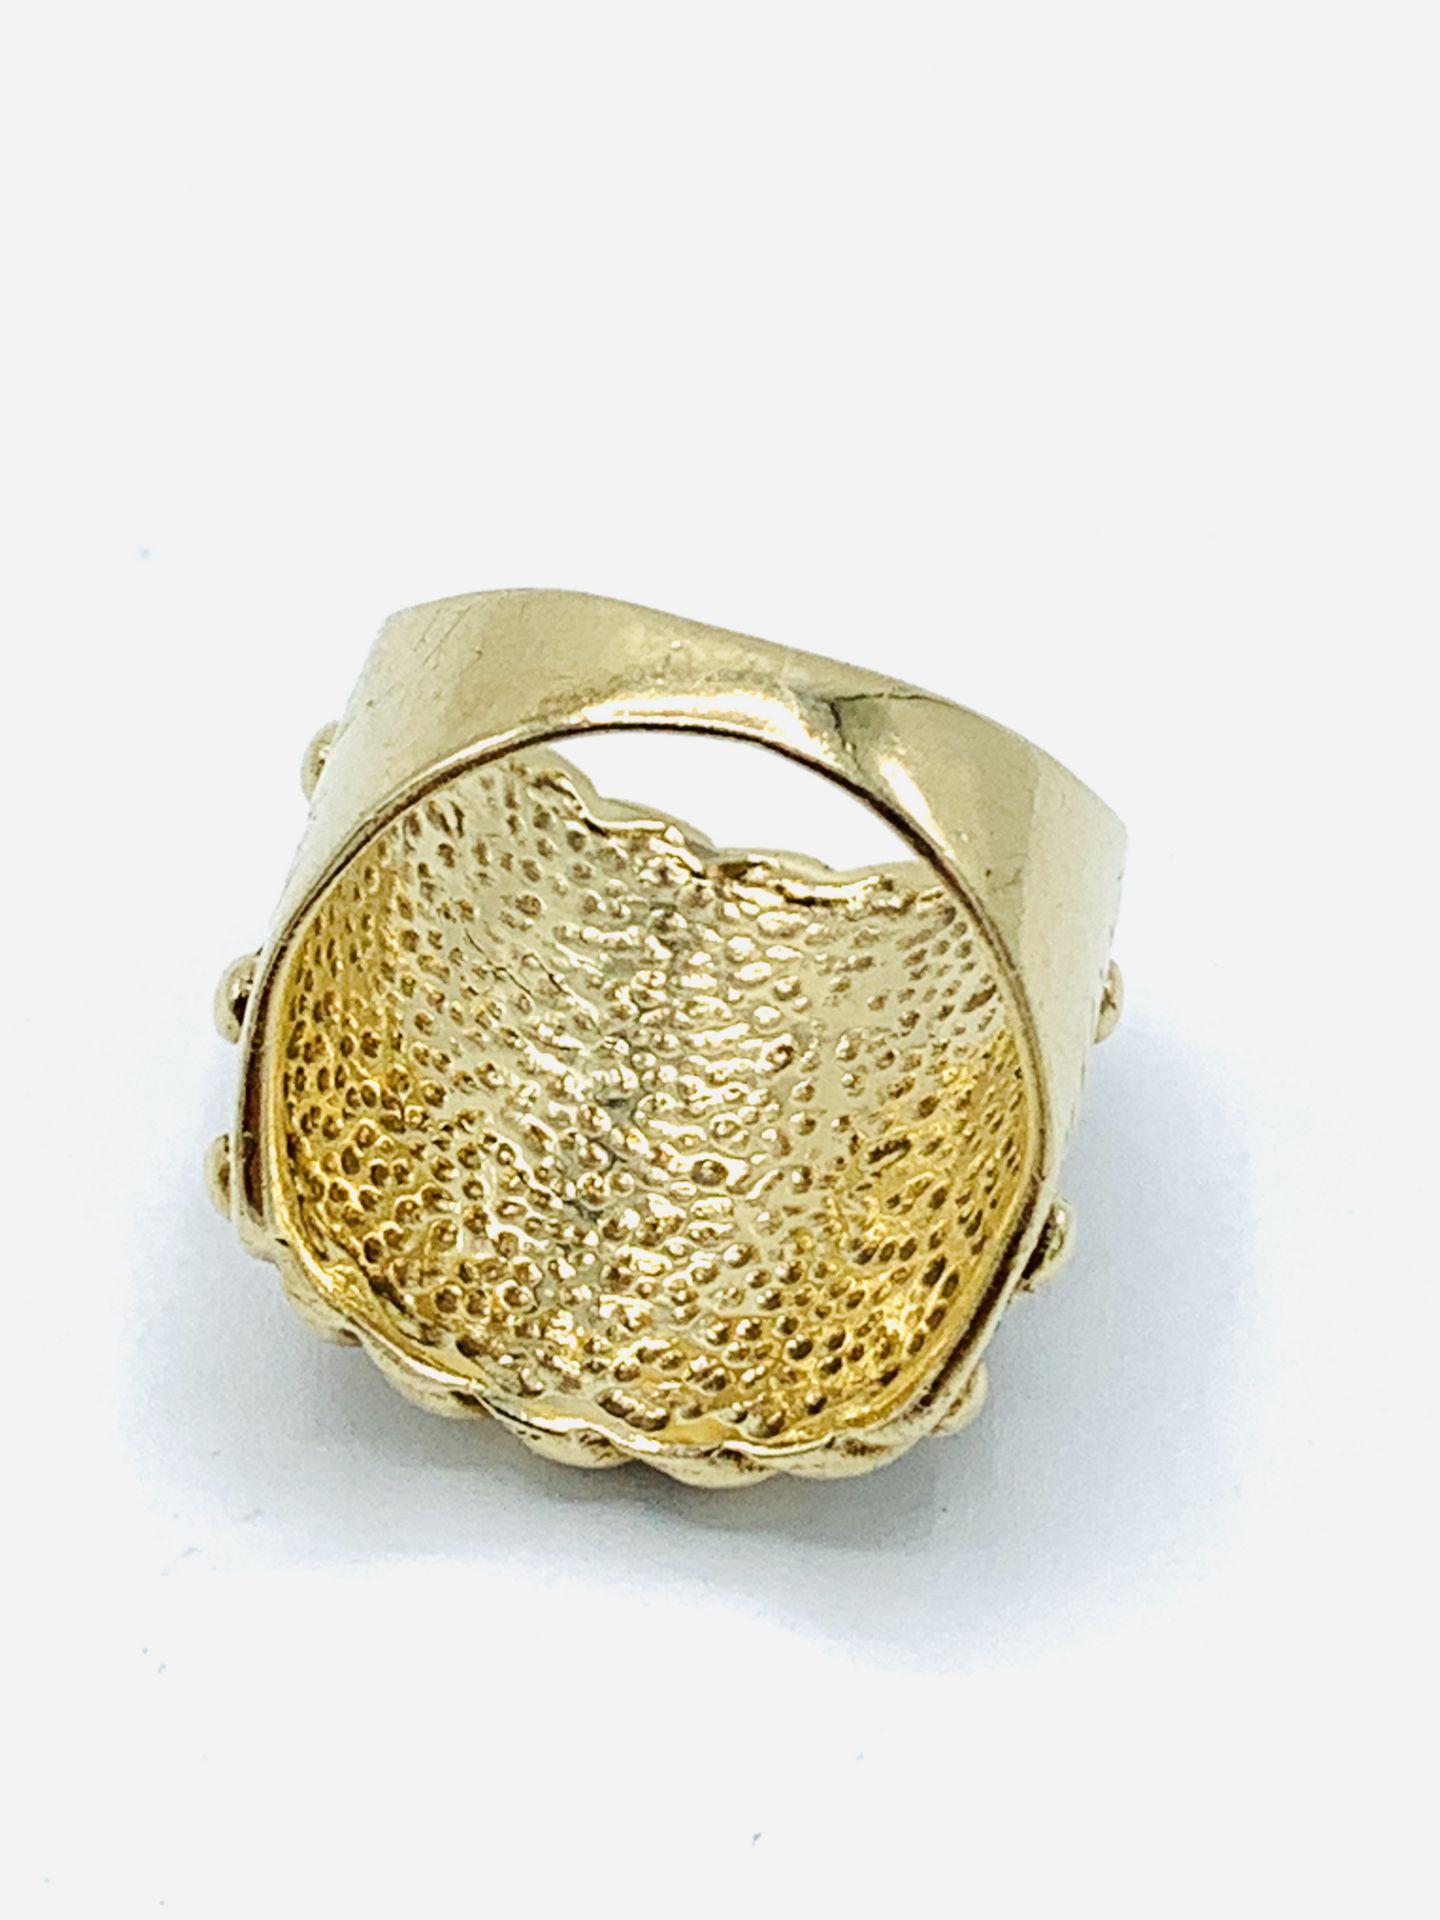 9ct gold 'gypsy' ring. - Image 3 of 3